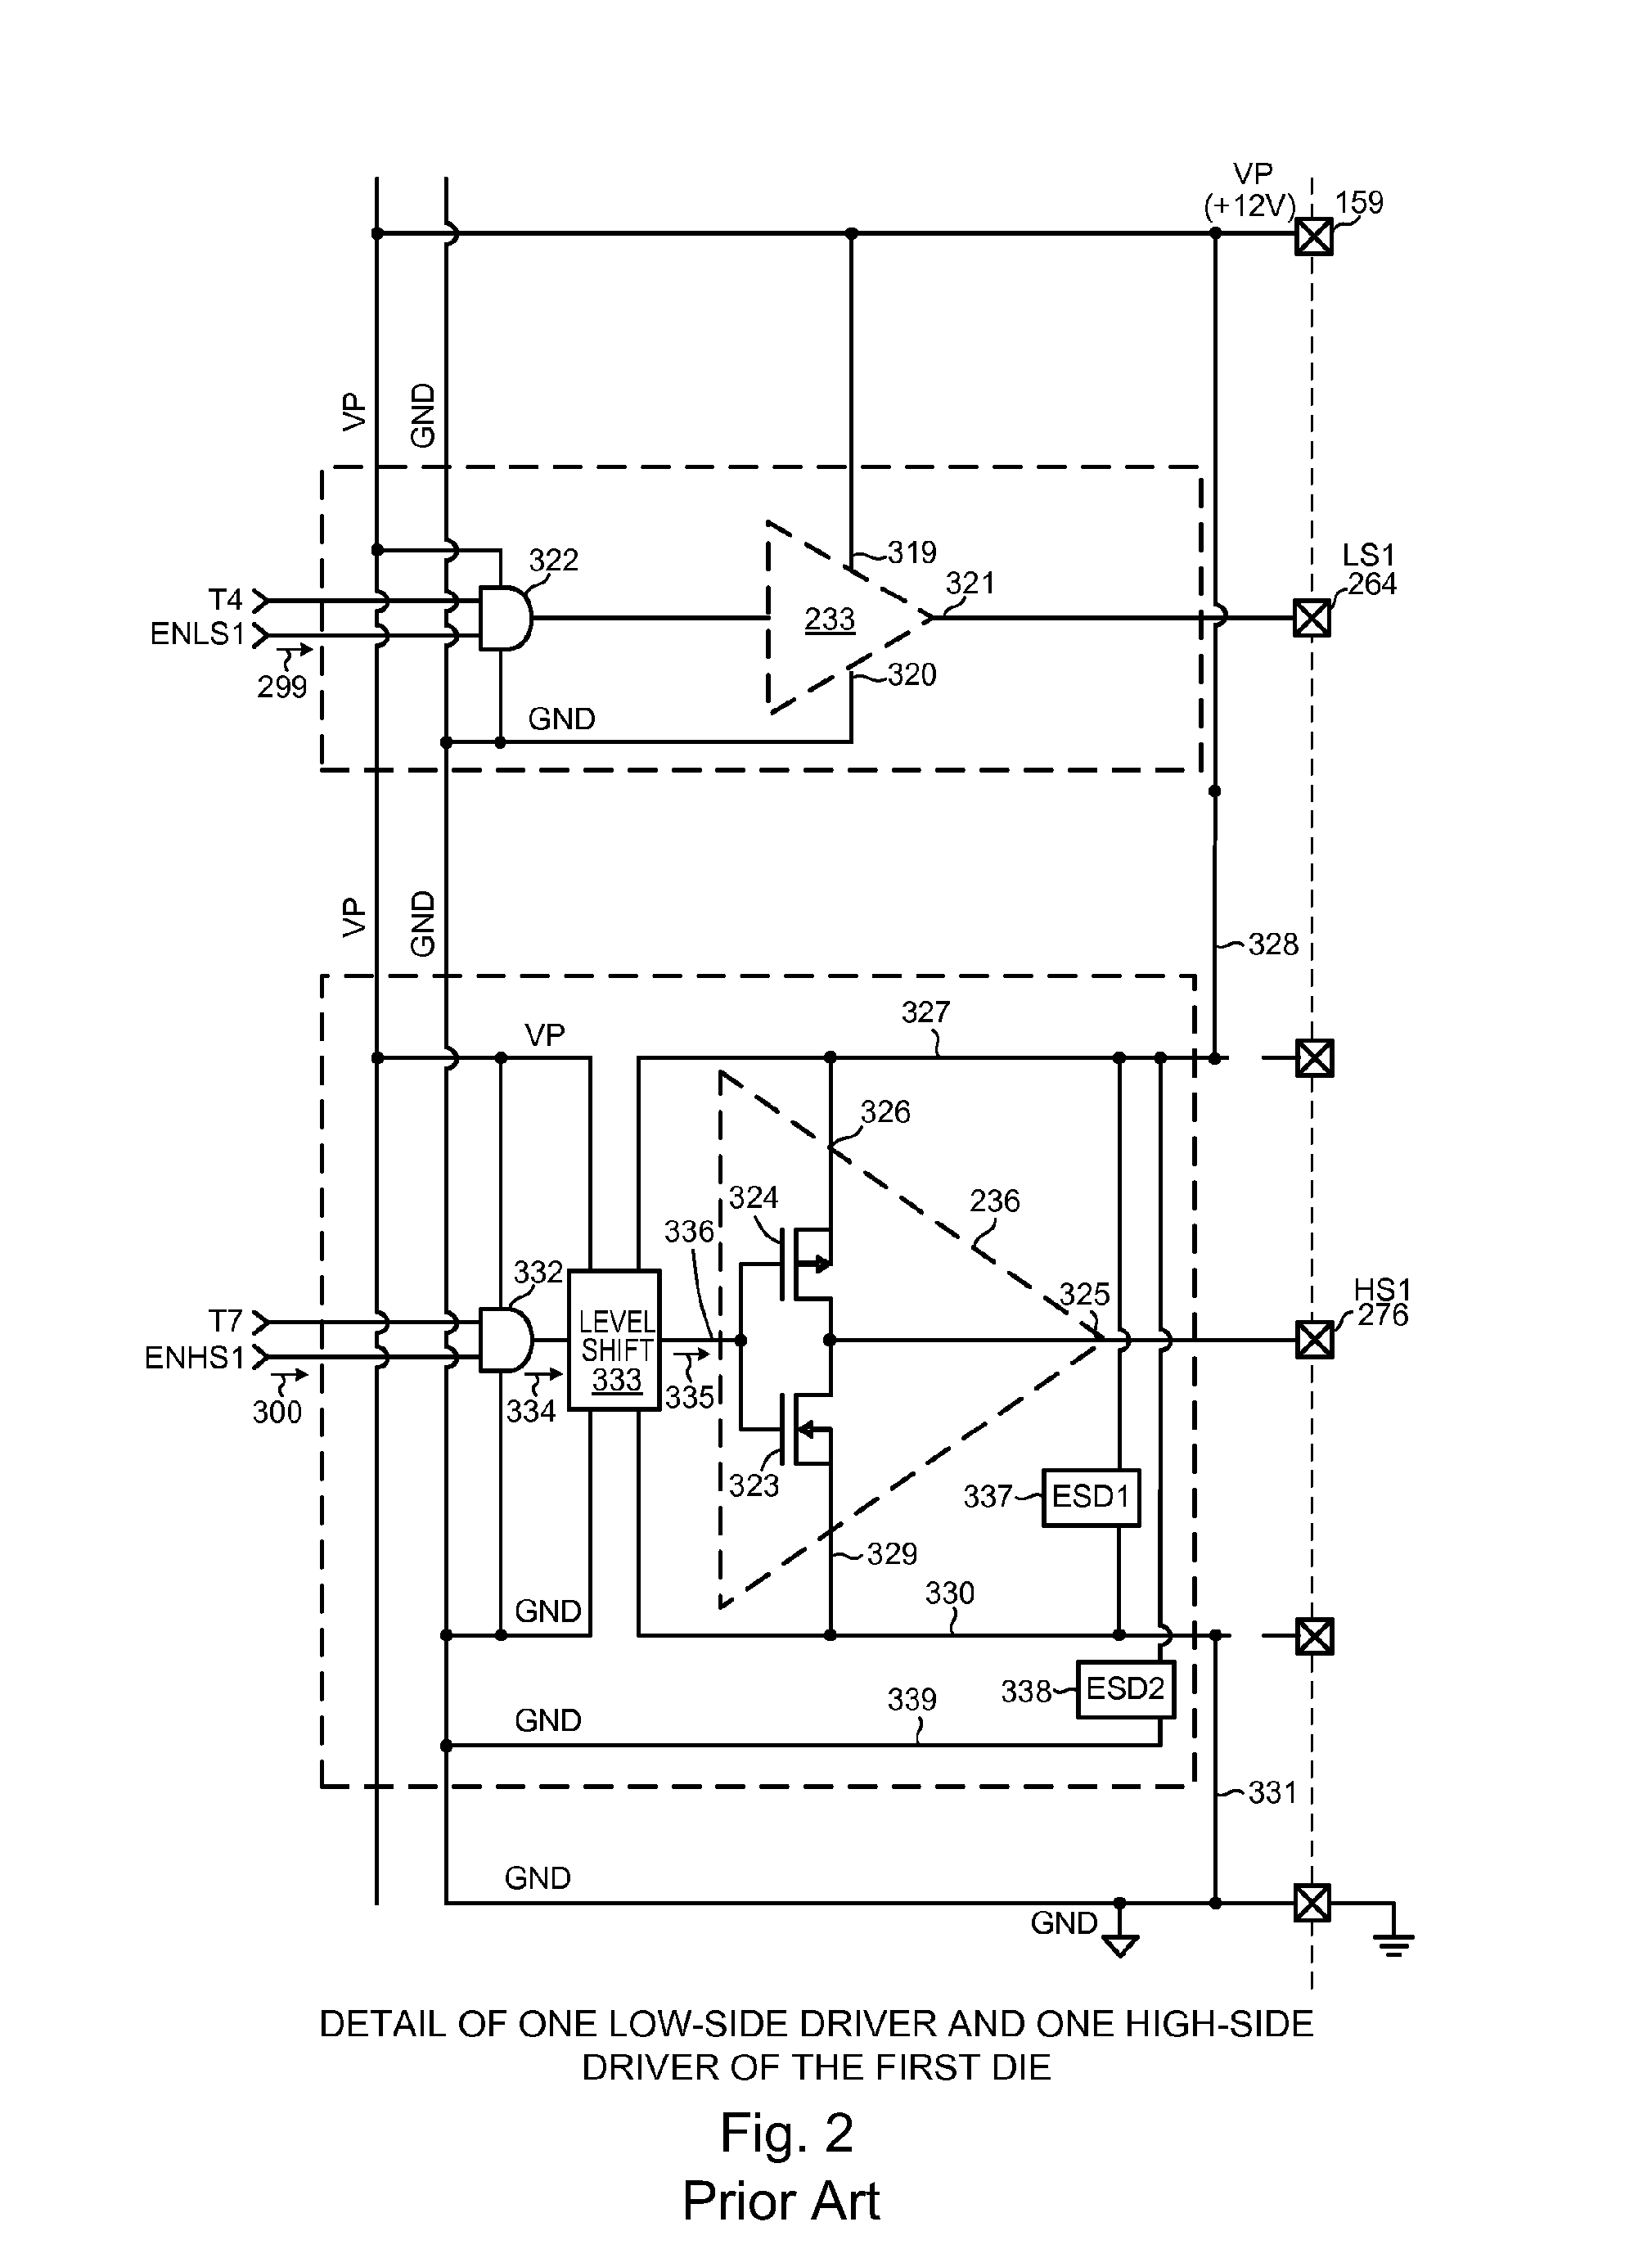 Power control module with improved start requirements